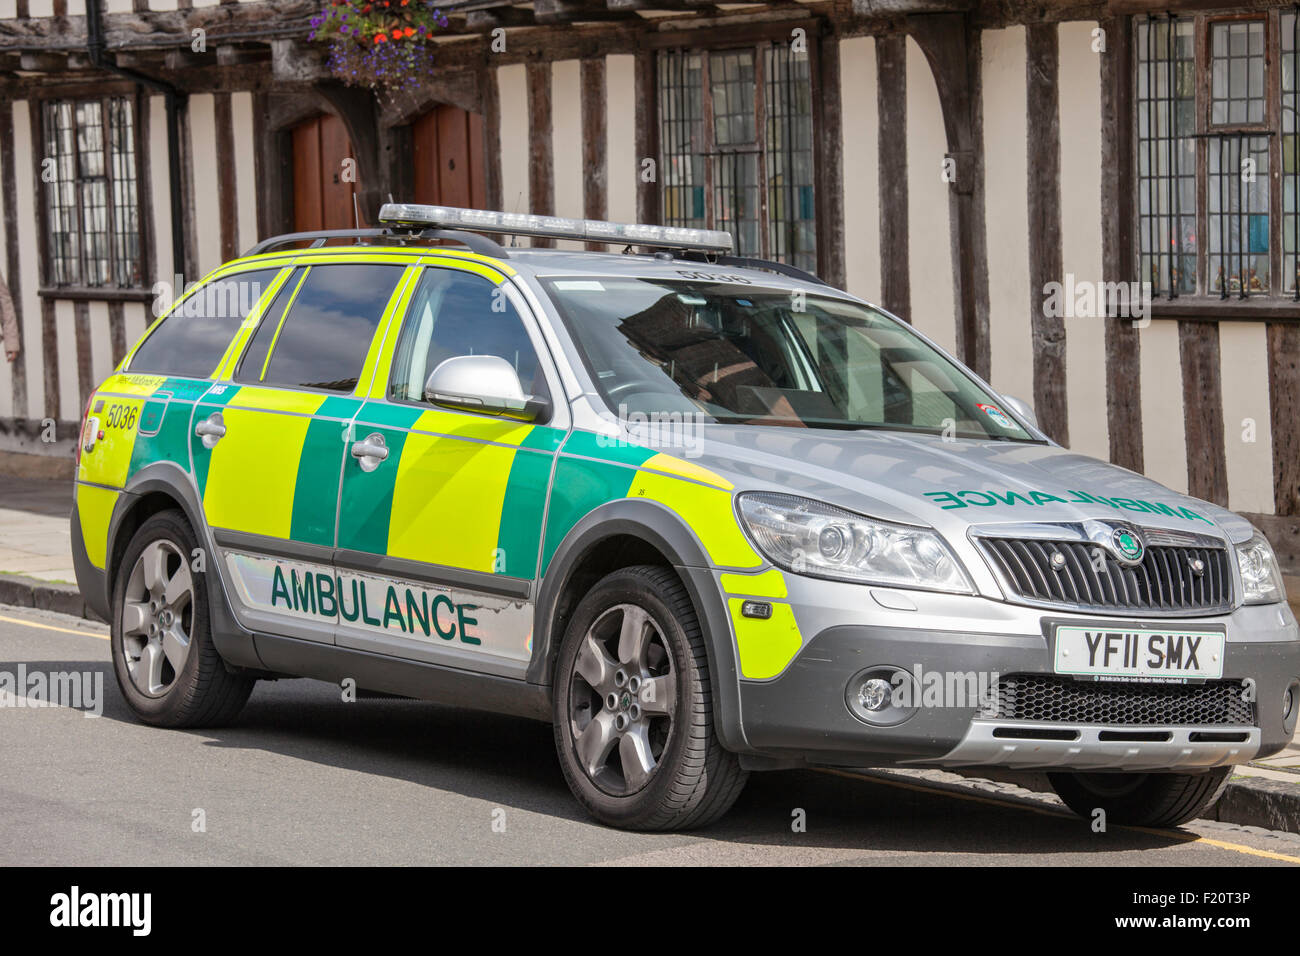 Paramedic vehicle parked outside a timber-framed building, England, UK Stock Photo